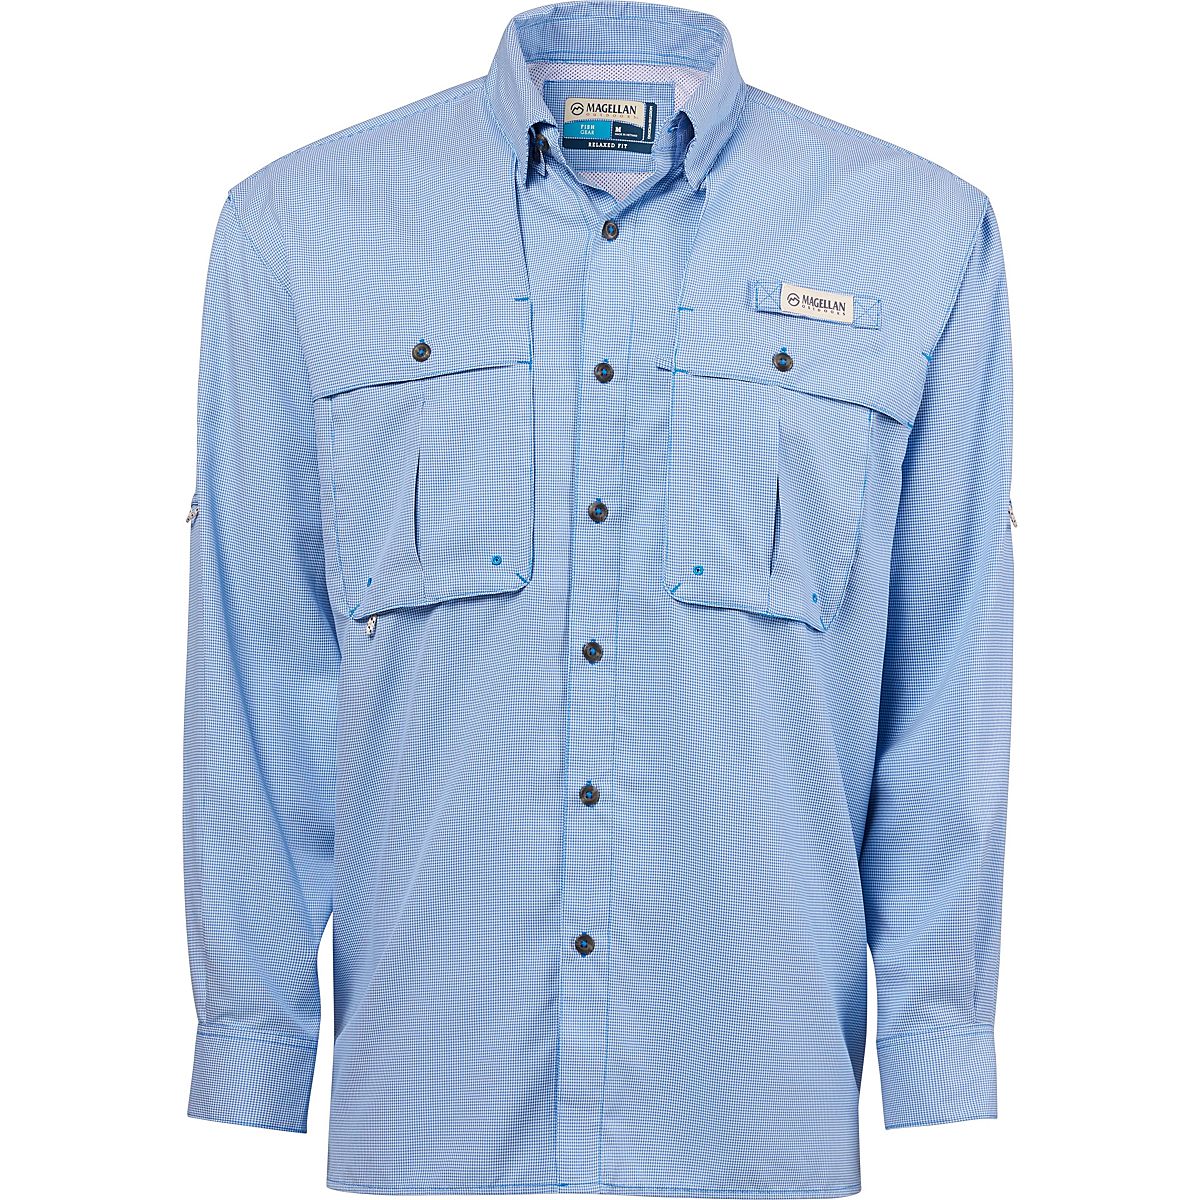 Long Sleeve Fishing Shirts Comments / Recommendations